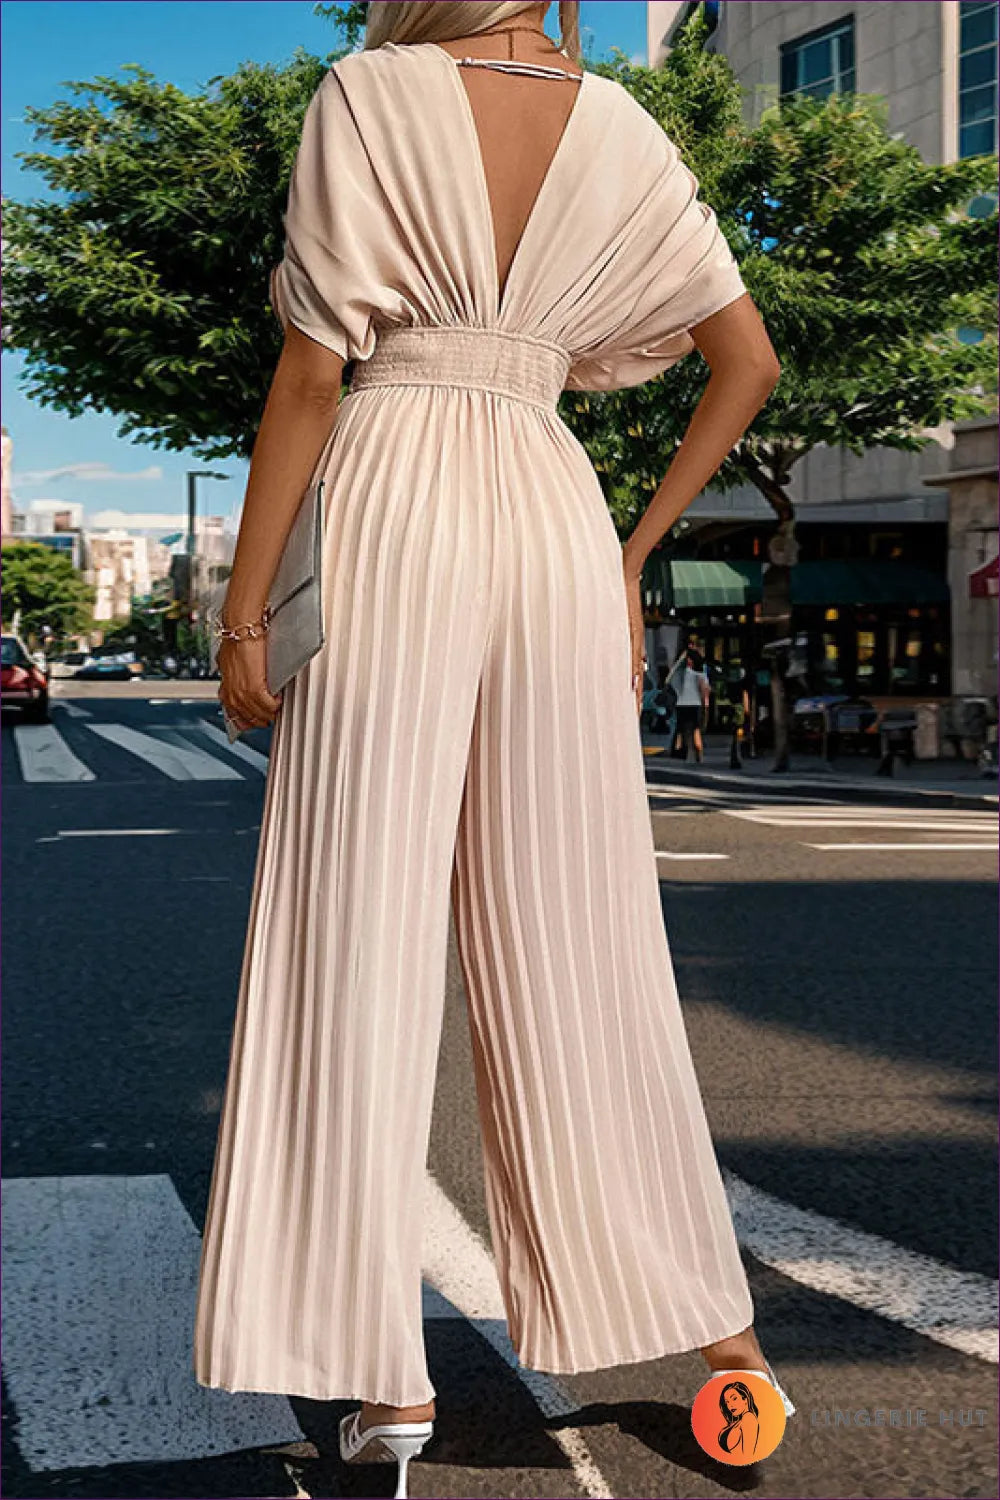 Pleated Summer Jumpsuit - Youthful And Elegant For x